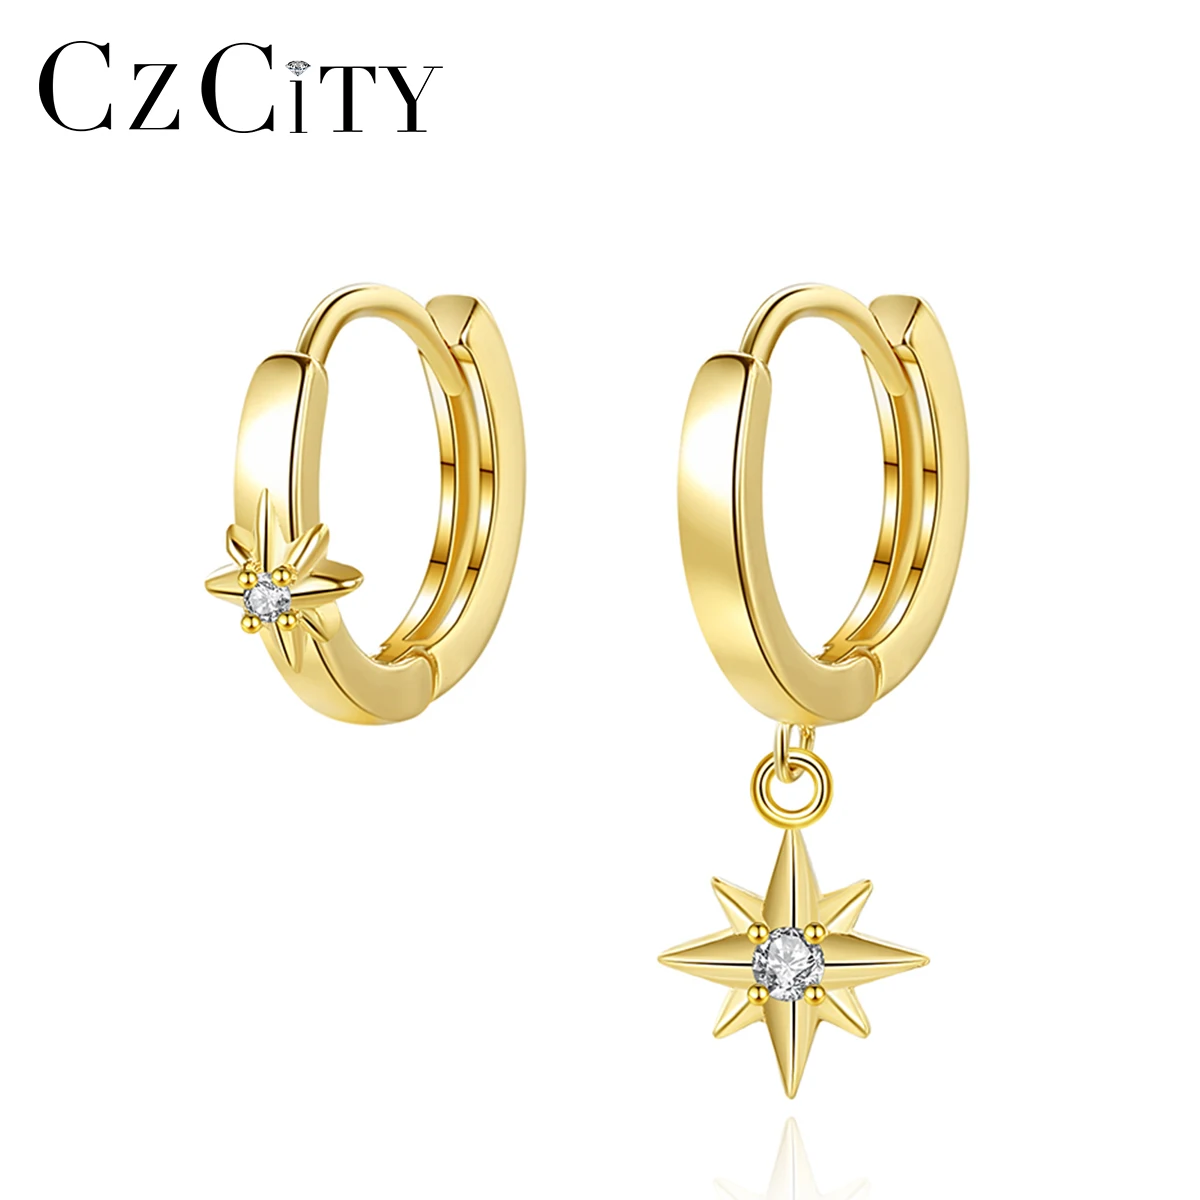 

CZCITY Asymmetrical 925 Sterling Silver Hoop Earrings for Women Real 14K Gold Plated Luxury Trend Girl Party Unusual Accessories